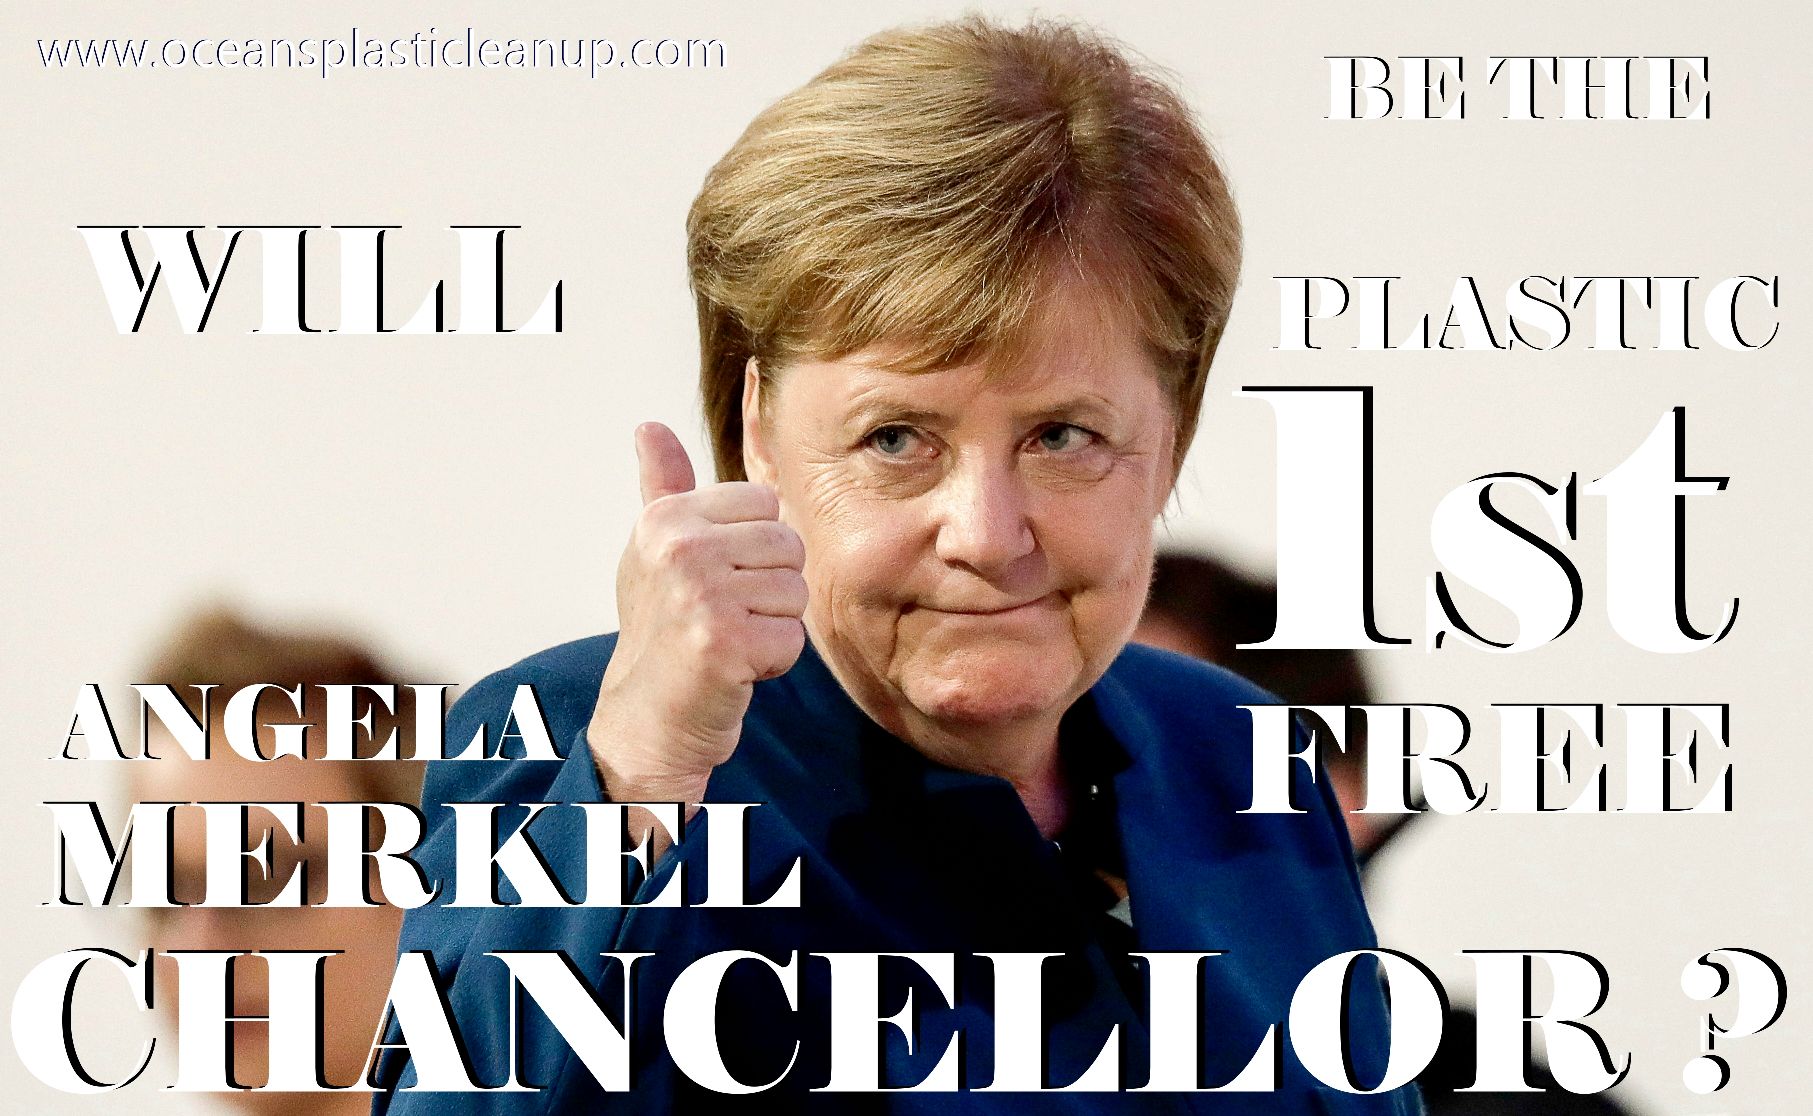 Could Angela Merkel be the first plastic free Chancellor of Germany ?